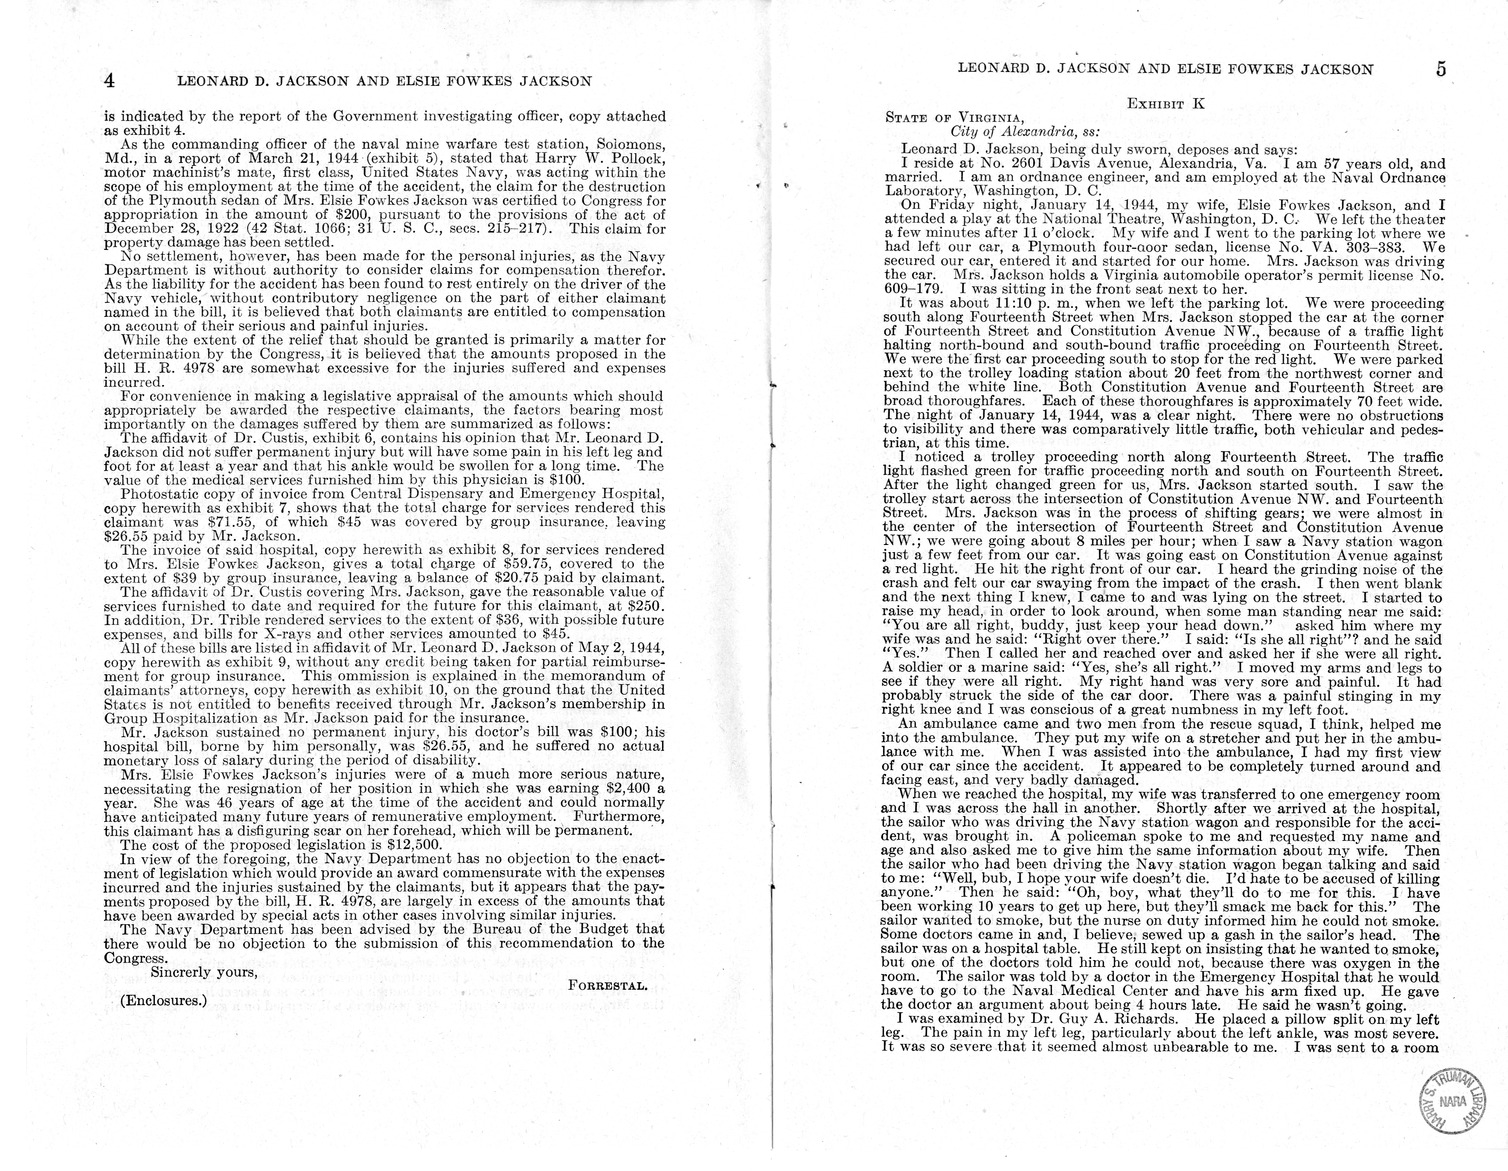 Memorandum from Frederick J. Bailey to M. C. Latta, H.R. 1059, For the Relief of Leonard D. Jackson and Elsie Fowkes Jackson, with Attachments